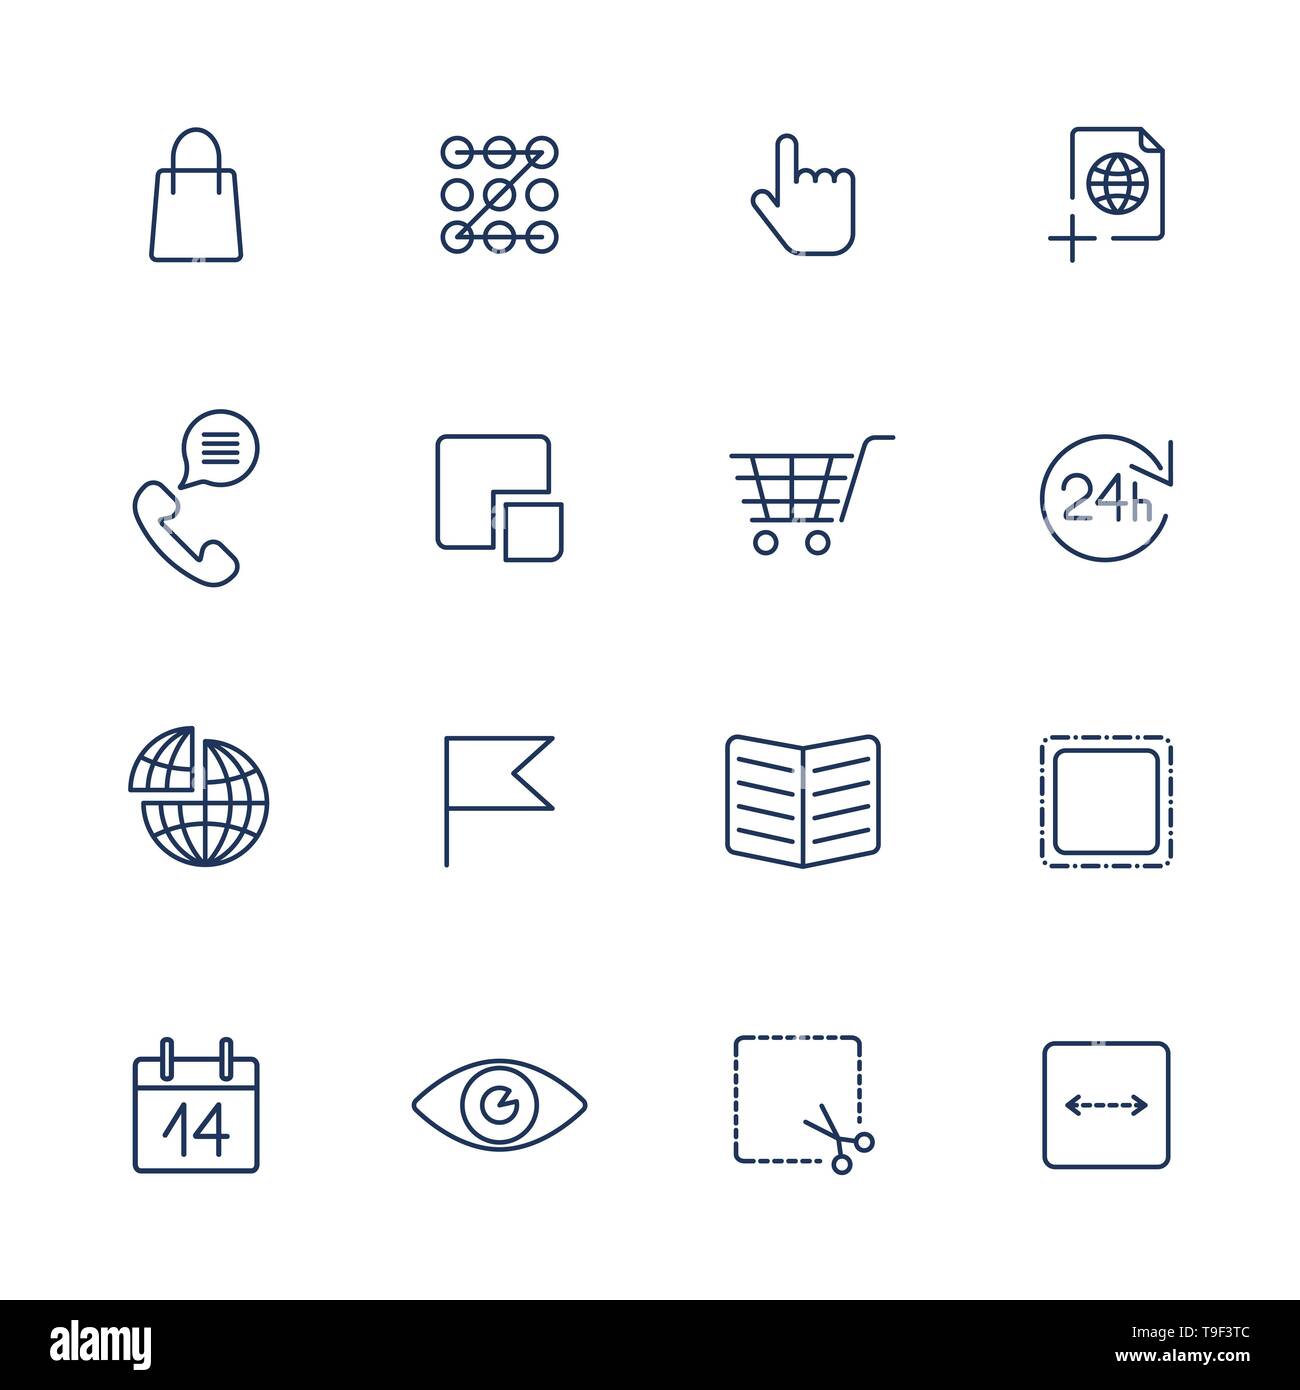 Thin line icon set. Icons for web, apps, programs and other Stock Vector